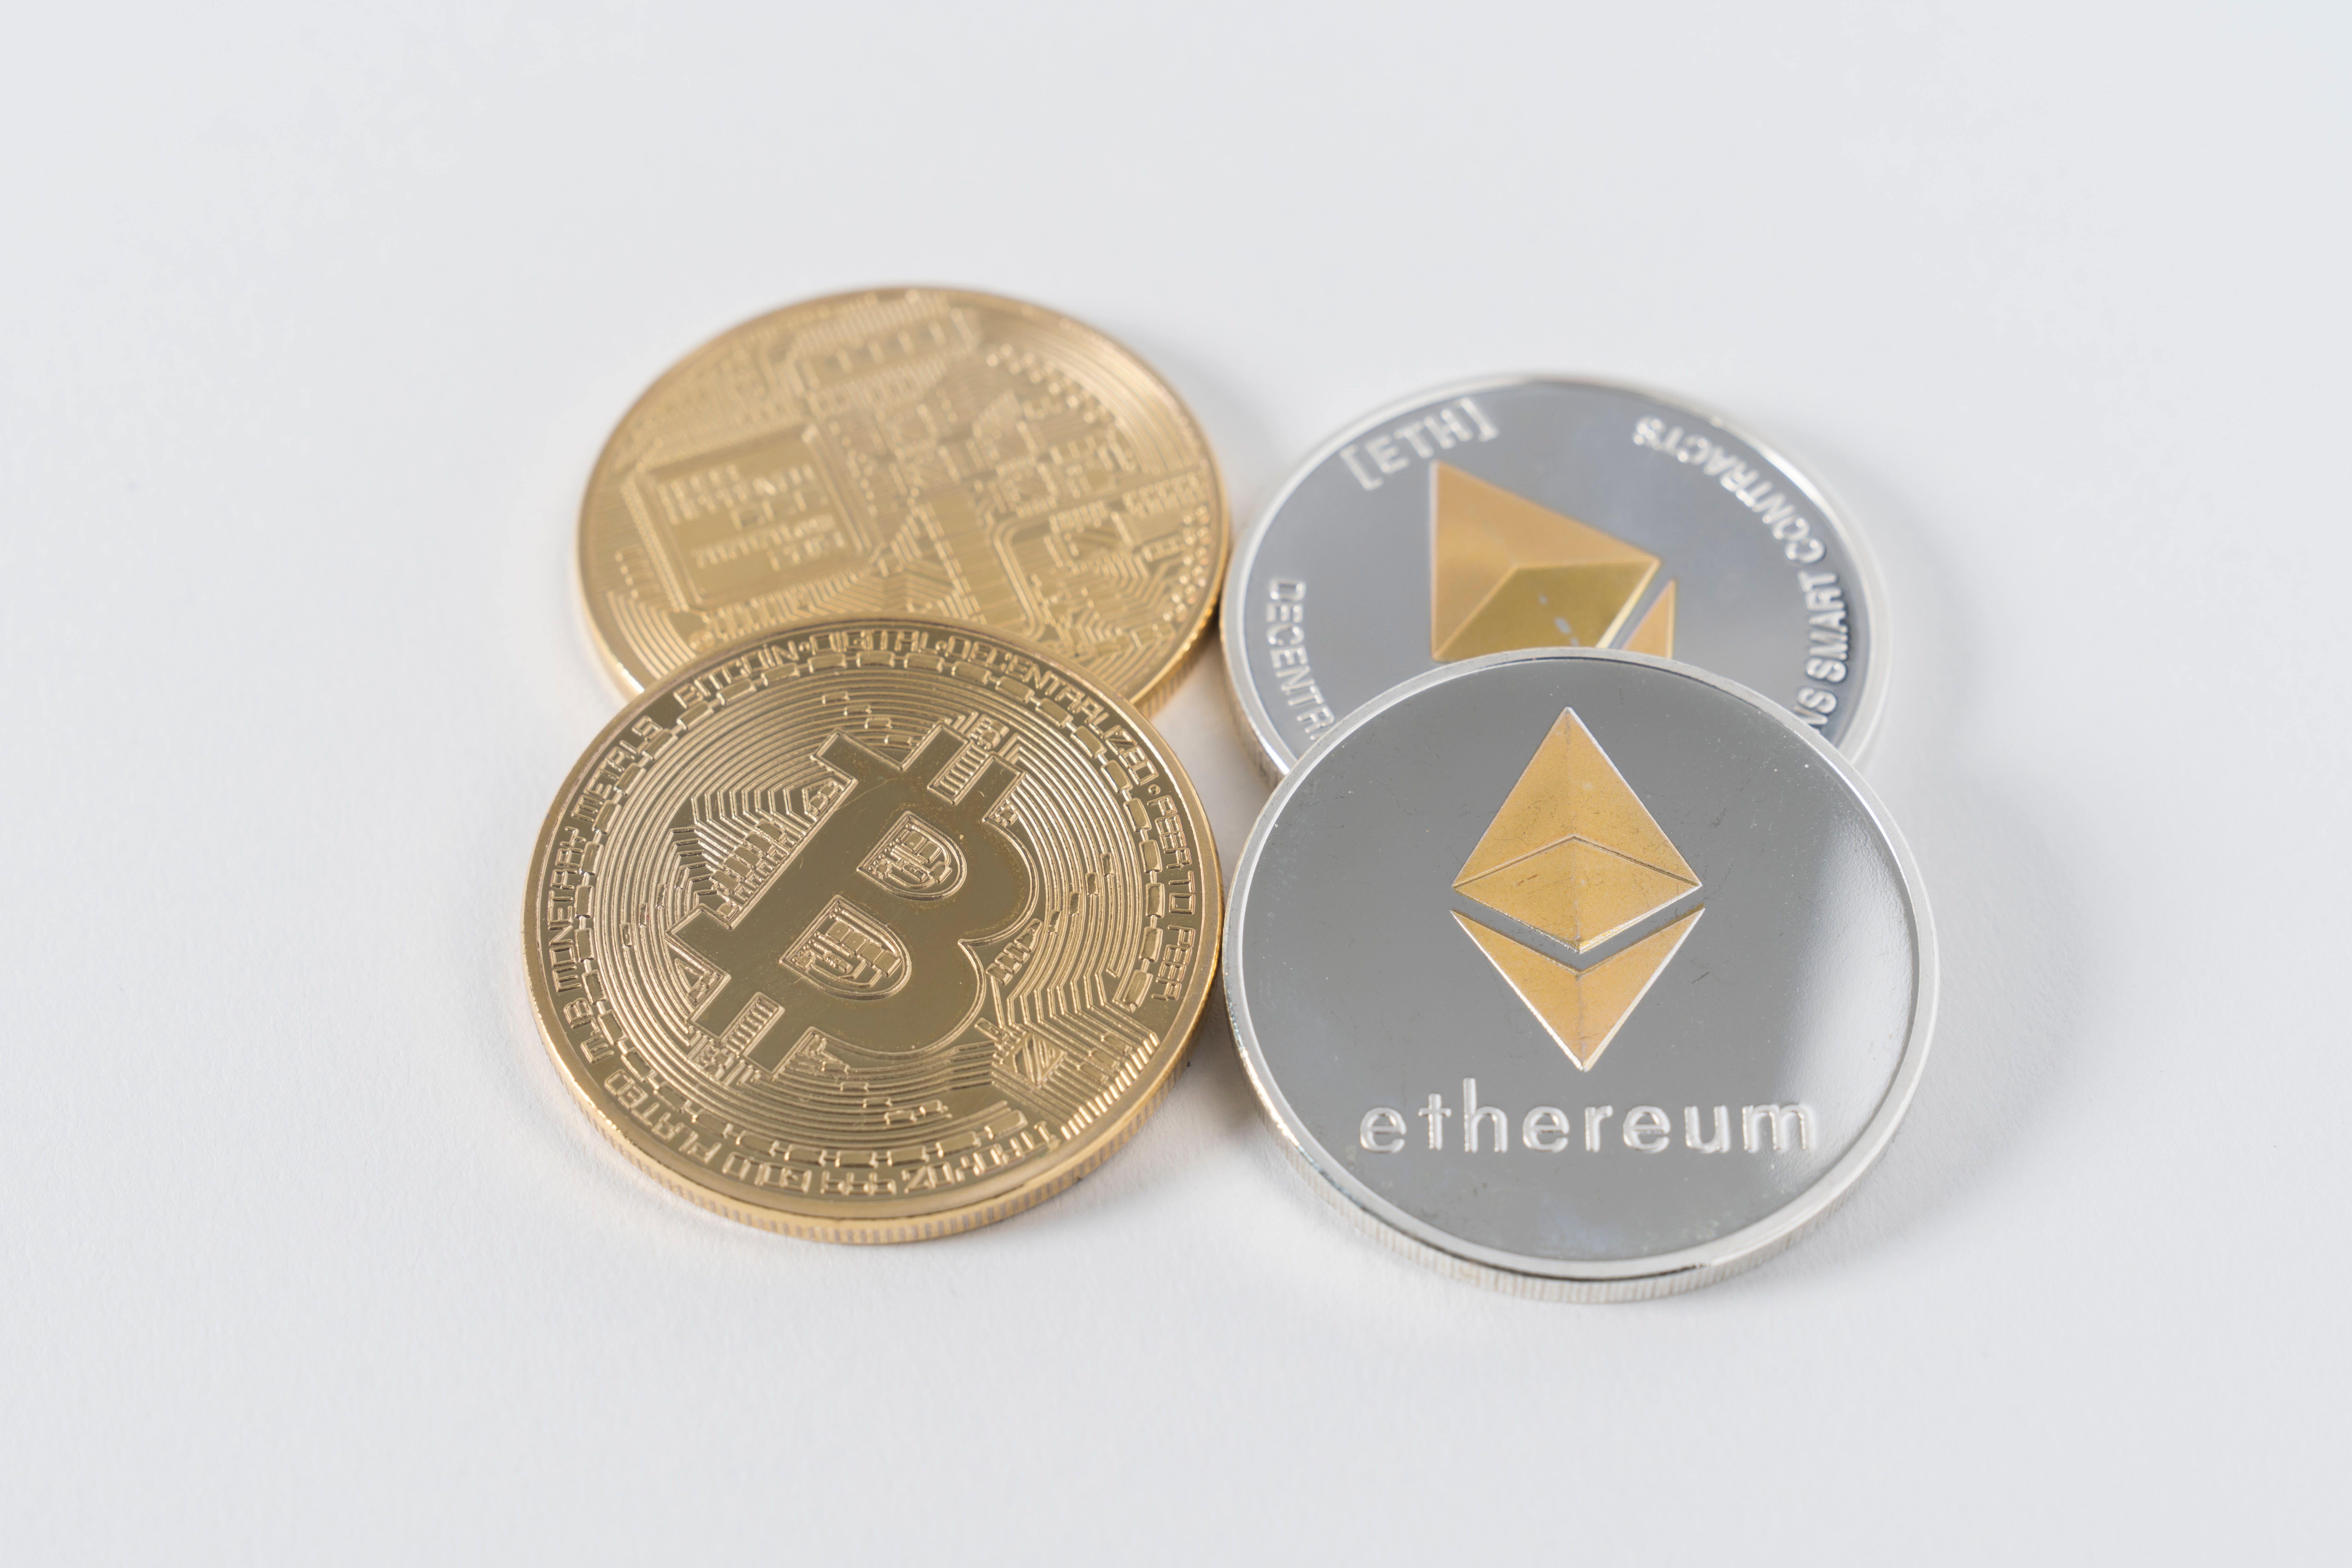 Will Bitcoin Confirm A Bullish Breakout And Ethereum Trend Higher? Here's What The Experts Are Saying